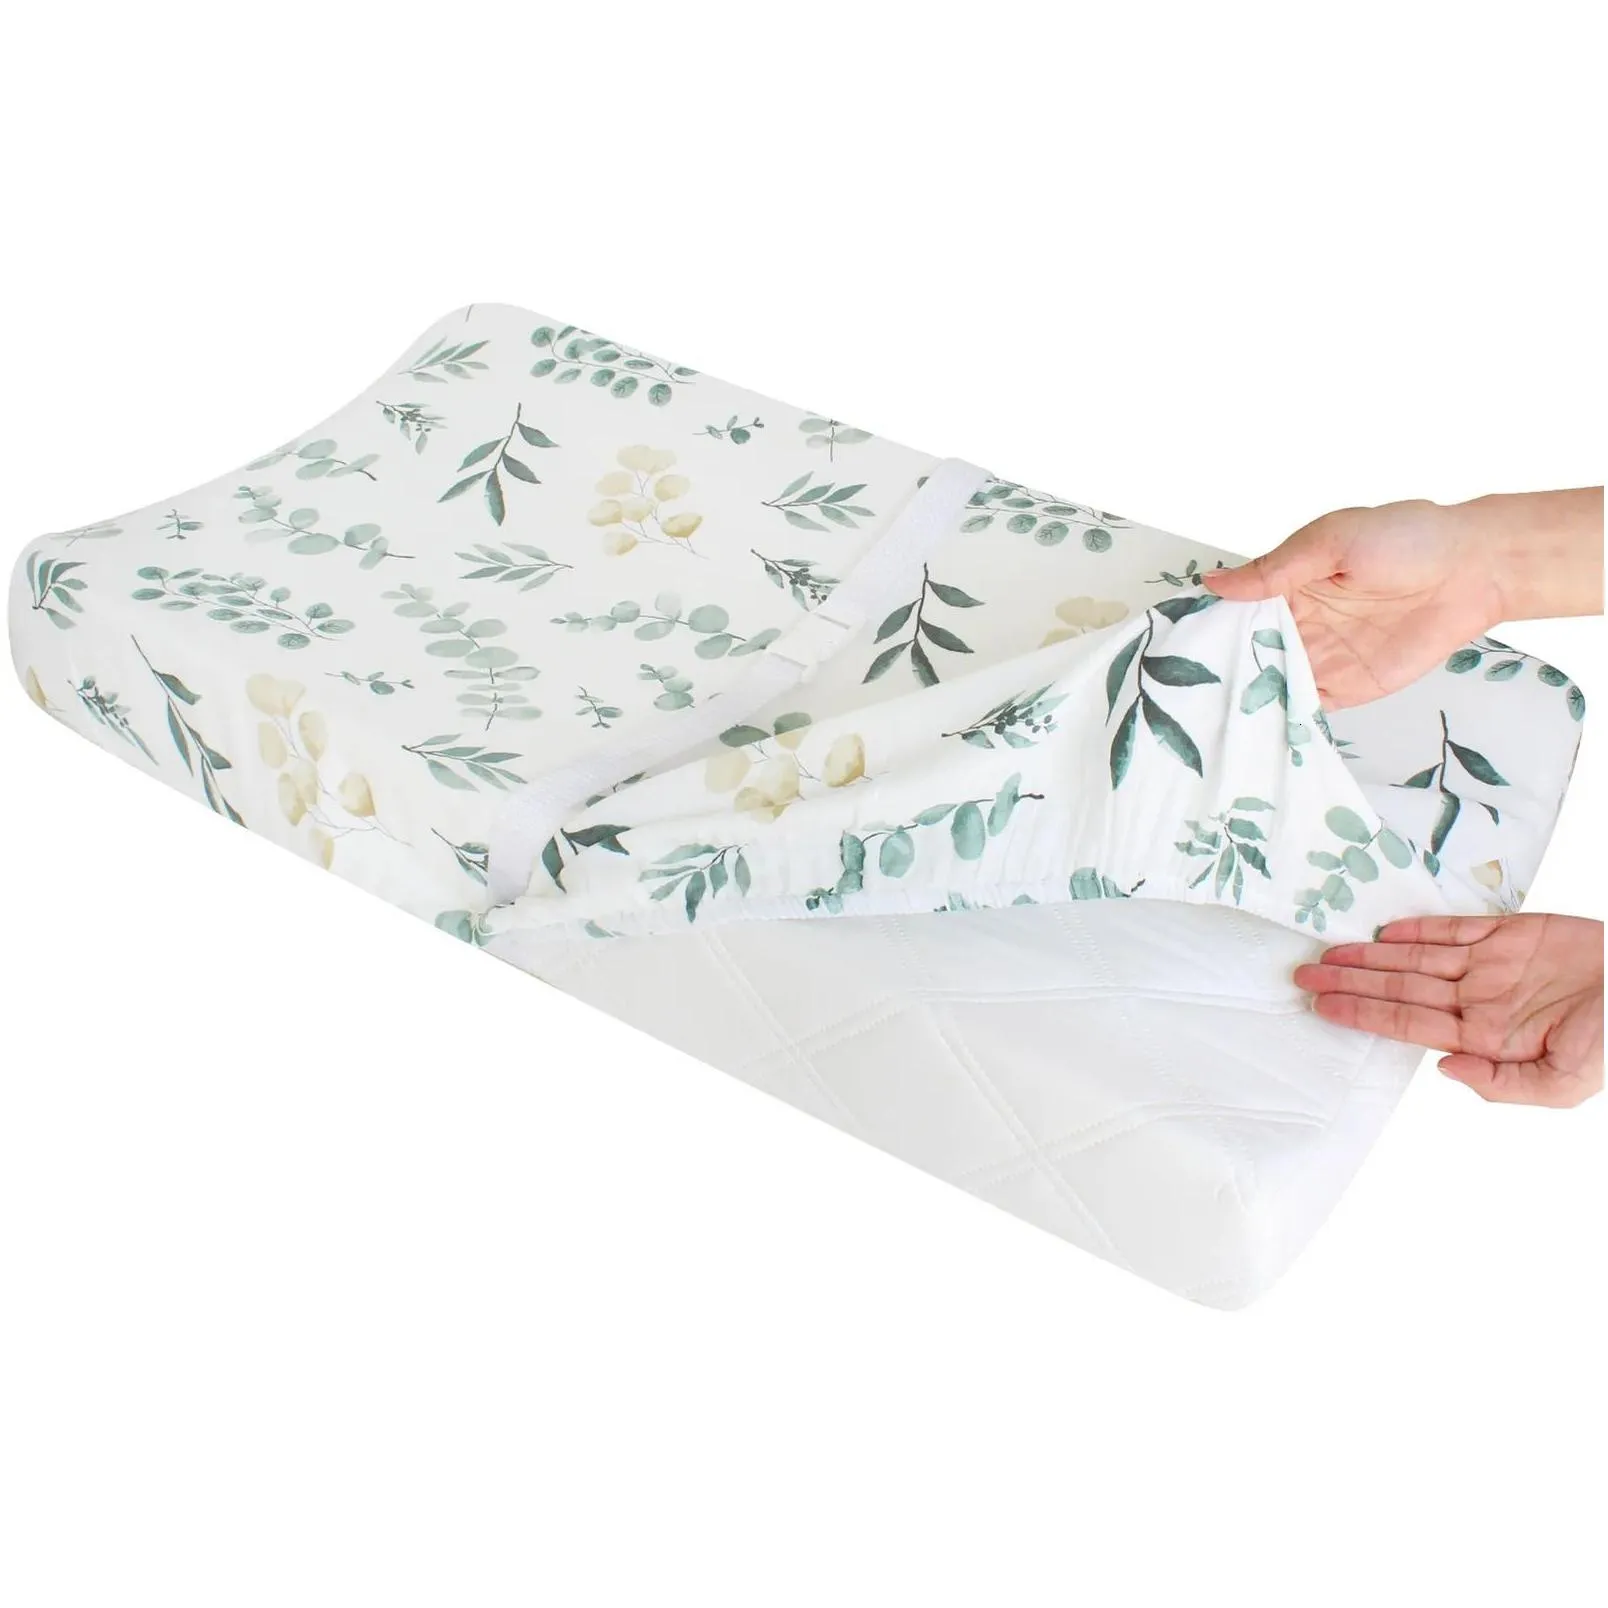 Changing Pads Covers Pad Cover Print Elastic Fitted Crib Sheet Infant Toddler Bed Nursery Unisex Diaper Change Table 231202